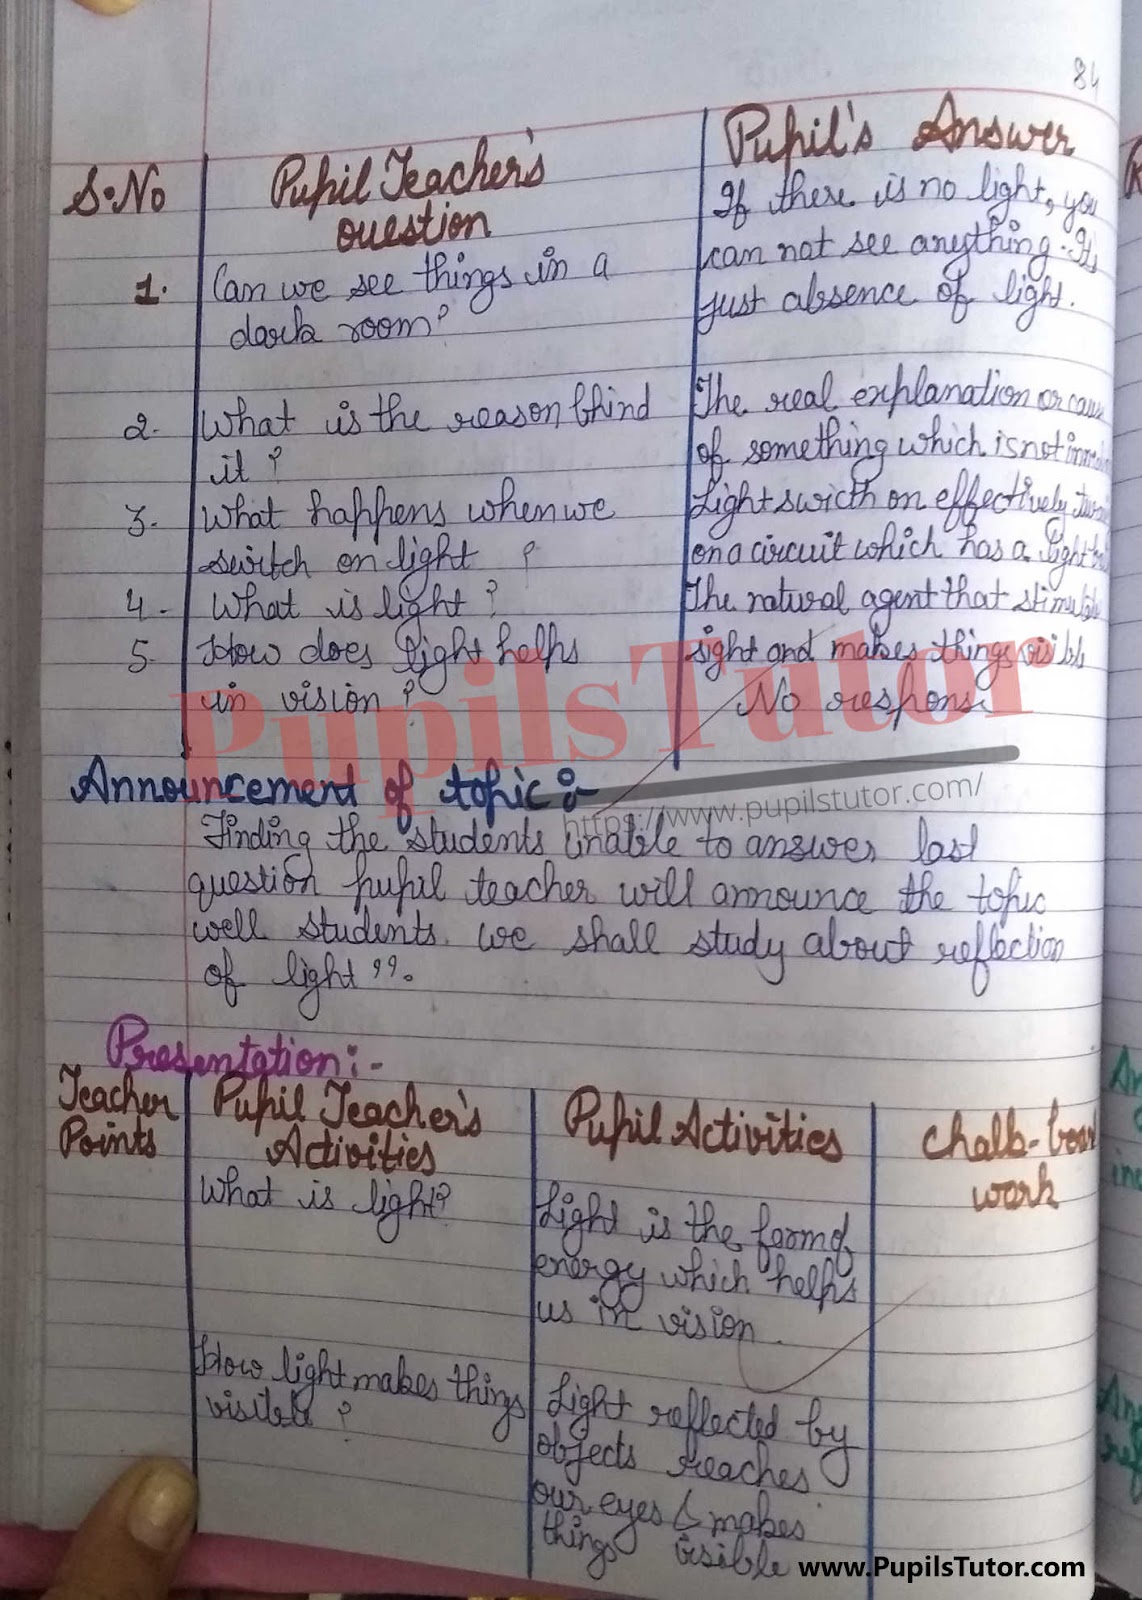 Mega And Real School Teaching Skill Law Of Reflection And Light Lesson Plan For B.Ed And Deled In English Free Download PDF And PPT (Power Point Presentation And Slides) – (Page And Image Number 2) – PupilsTutor